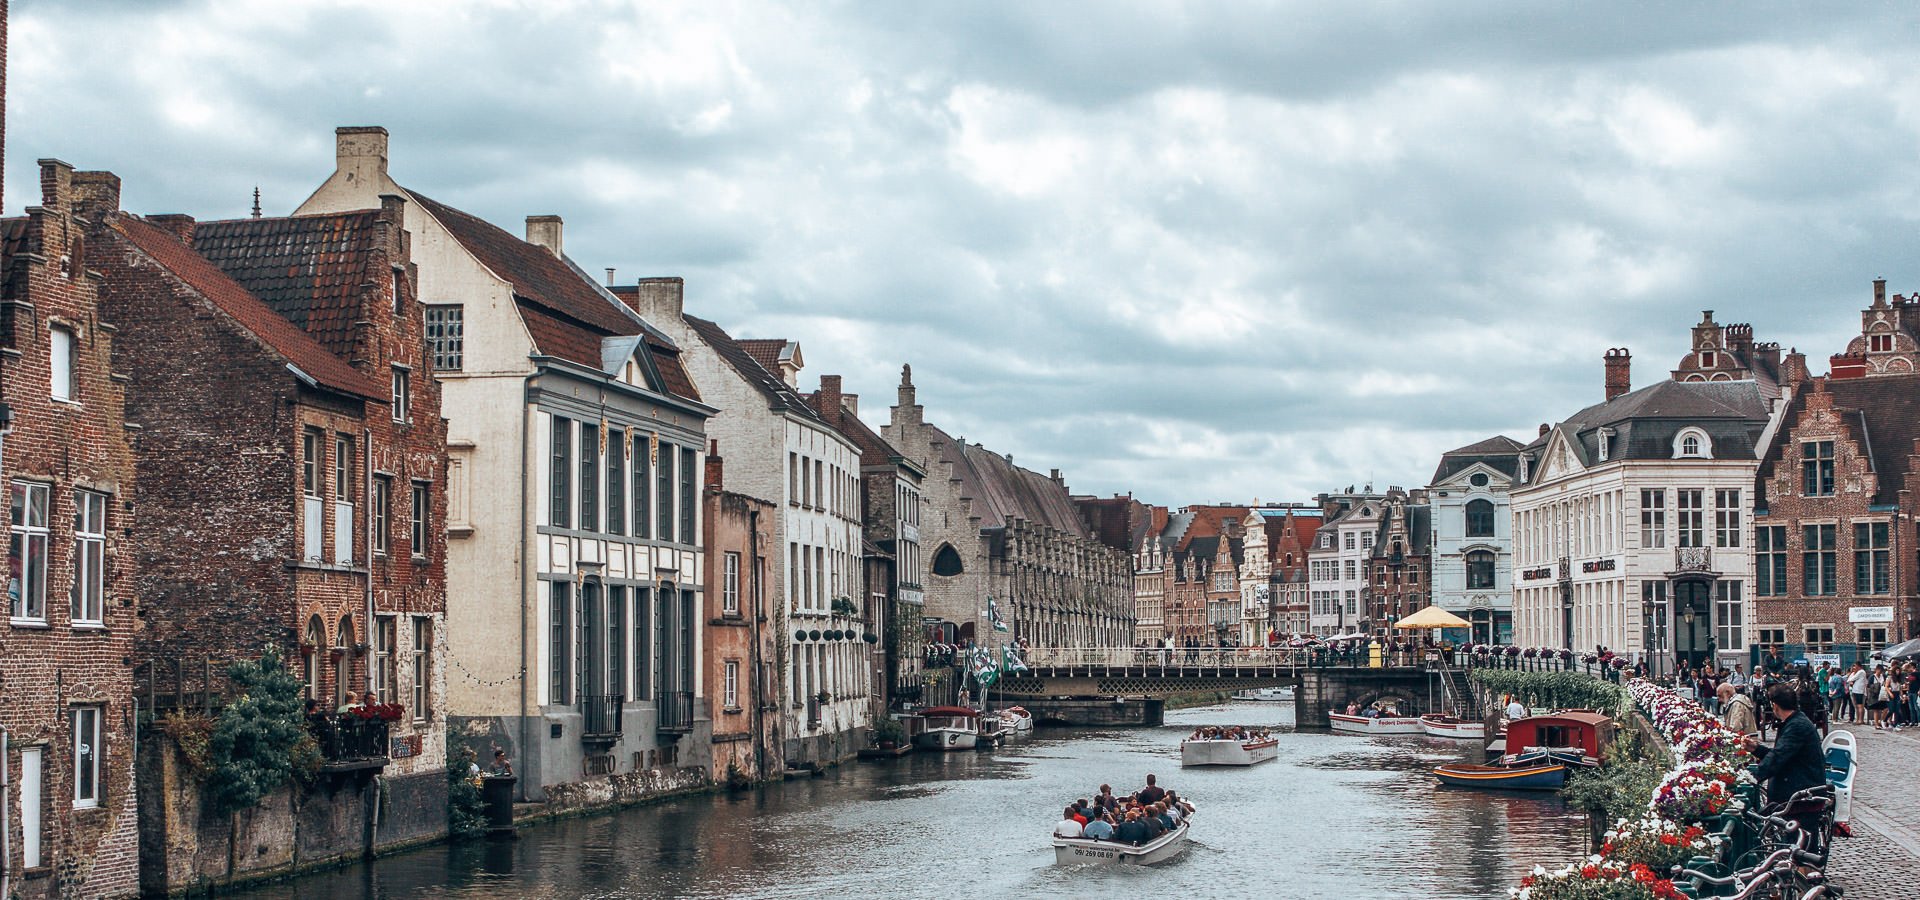 The Undiscovered Flemish Jewel: A Day Trip To Ghent | brunch in london 5